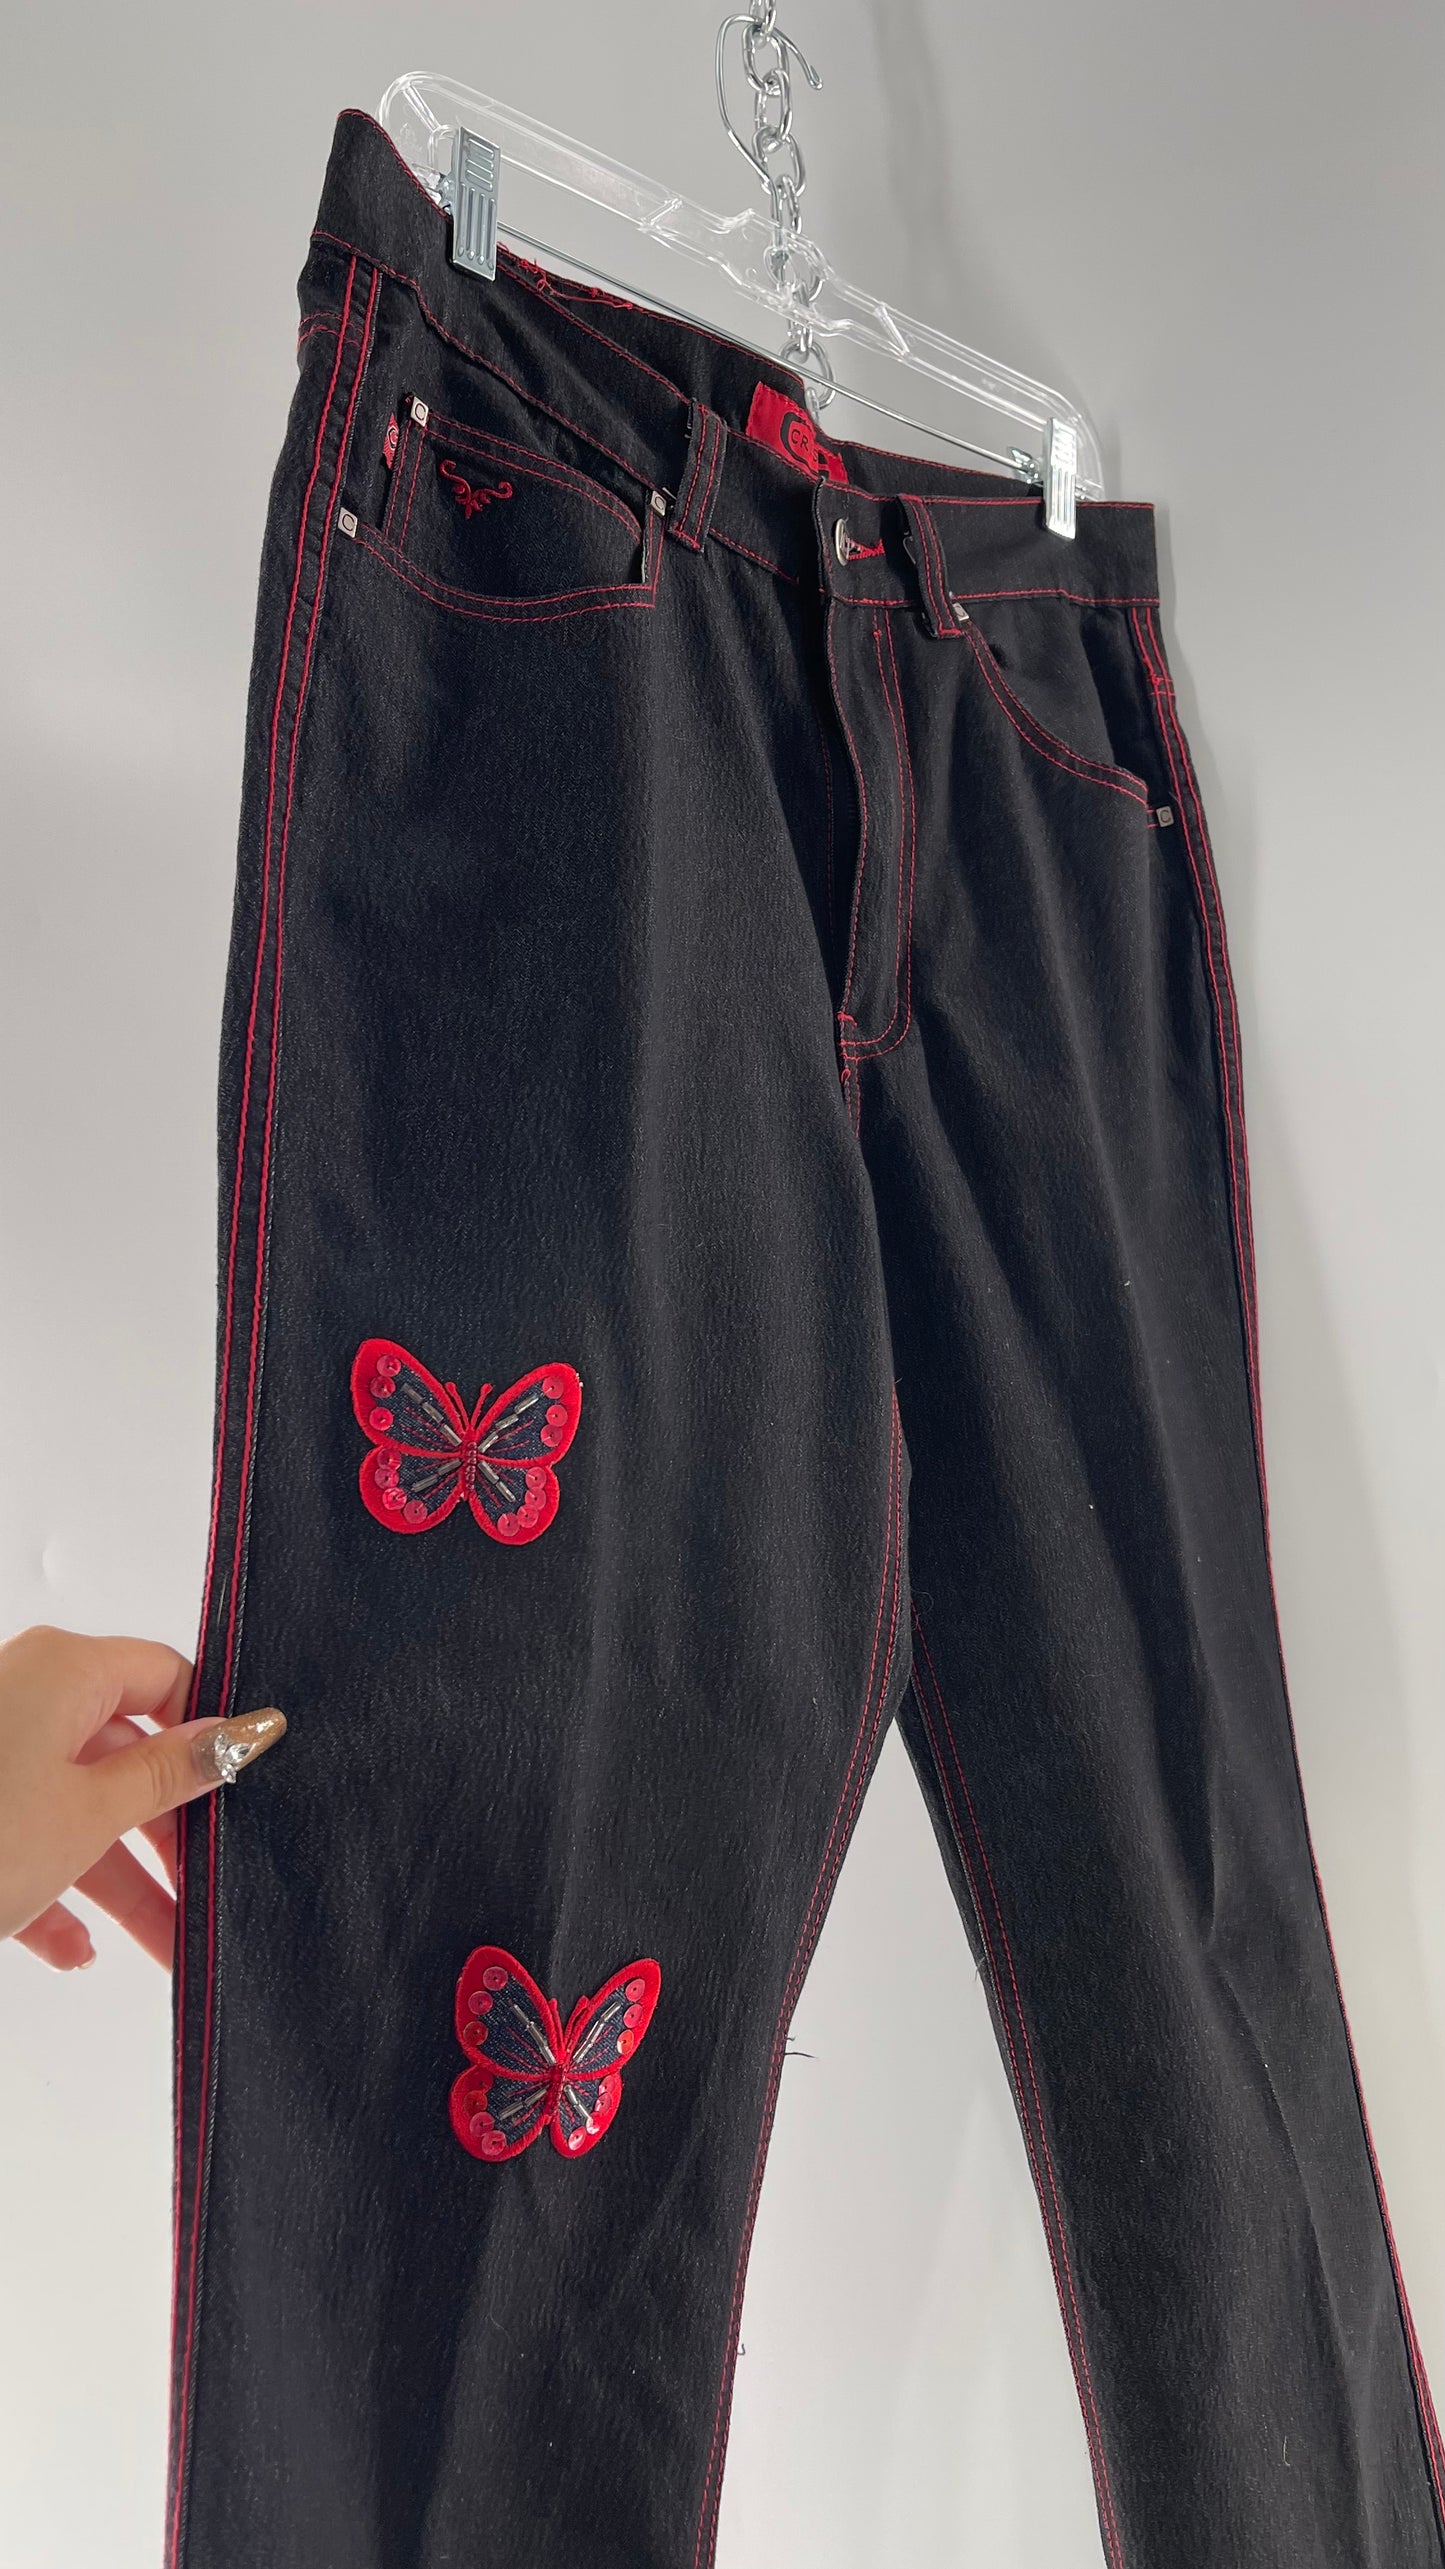 Rare Vintage Black Crest Jeans with Red Contrast Stitching and Butterfly Embroidery on Thigh and Back Pockets (14)